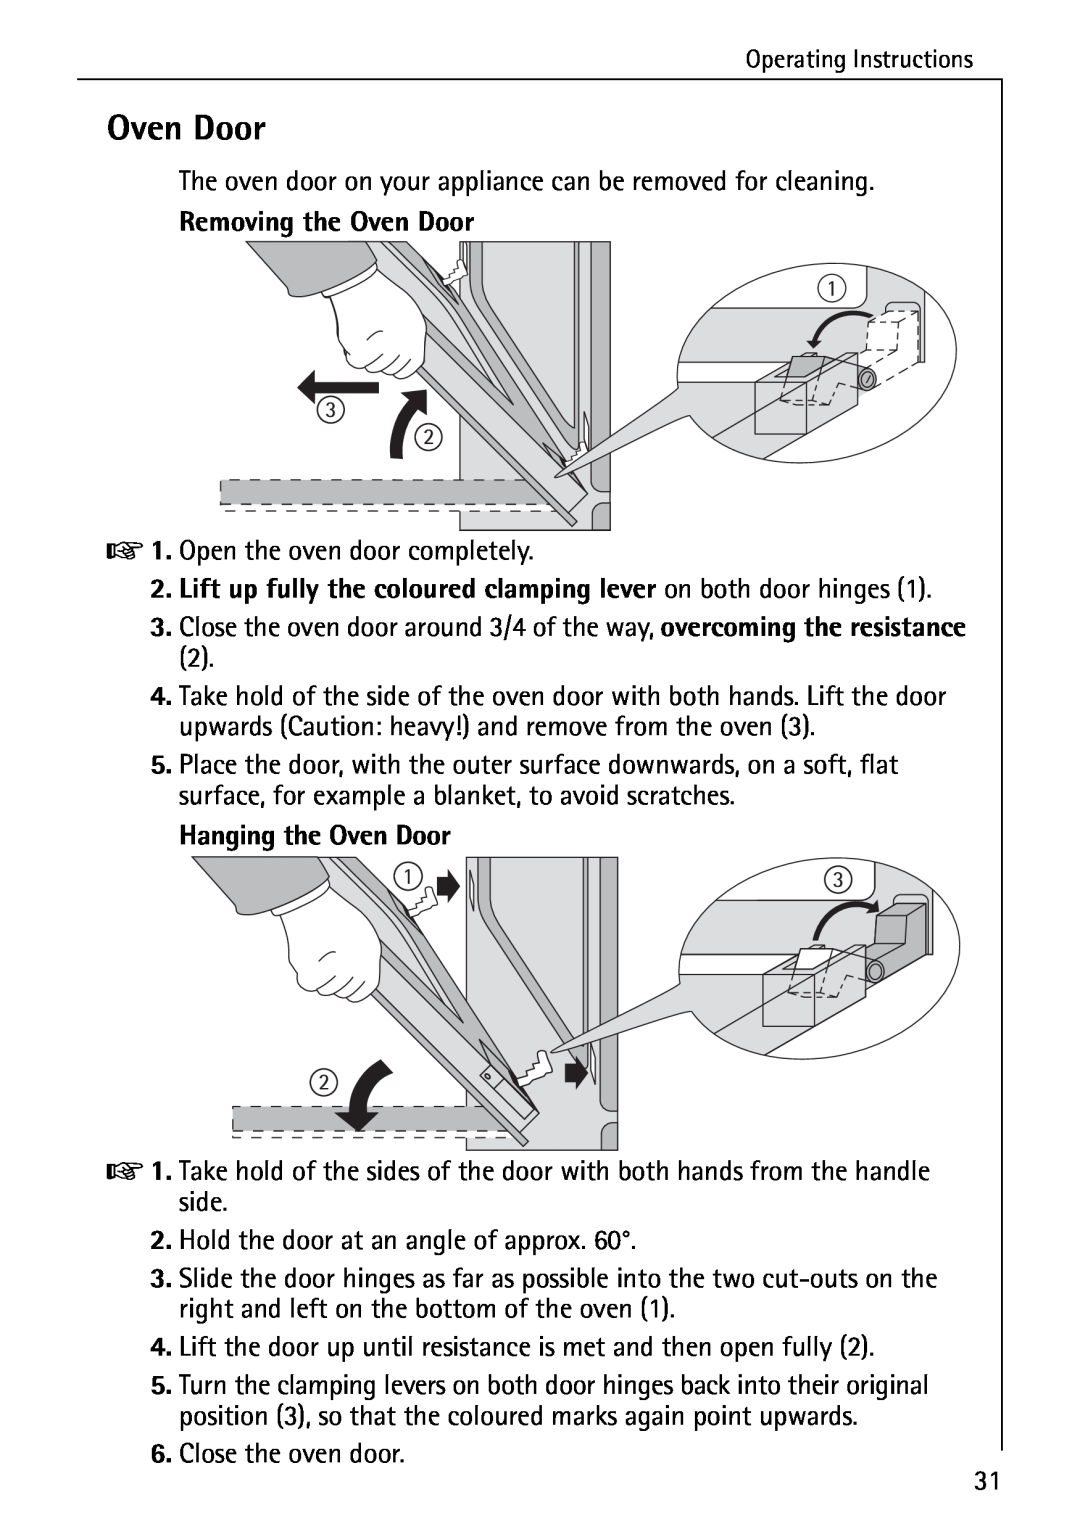 AEG 2003 F operating instructions Removing the Oven Door, Lift up fully the coloured clamping lever on both door hinges 